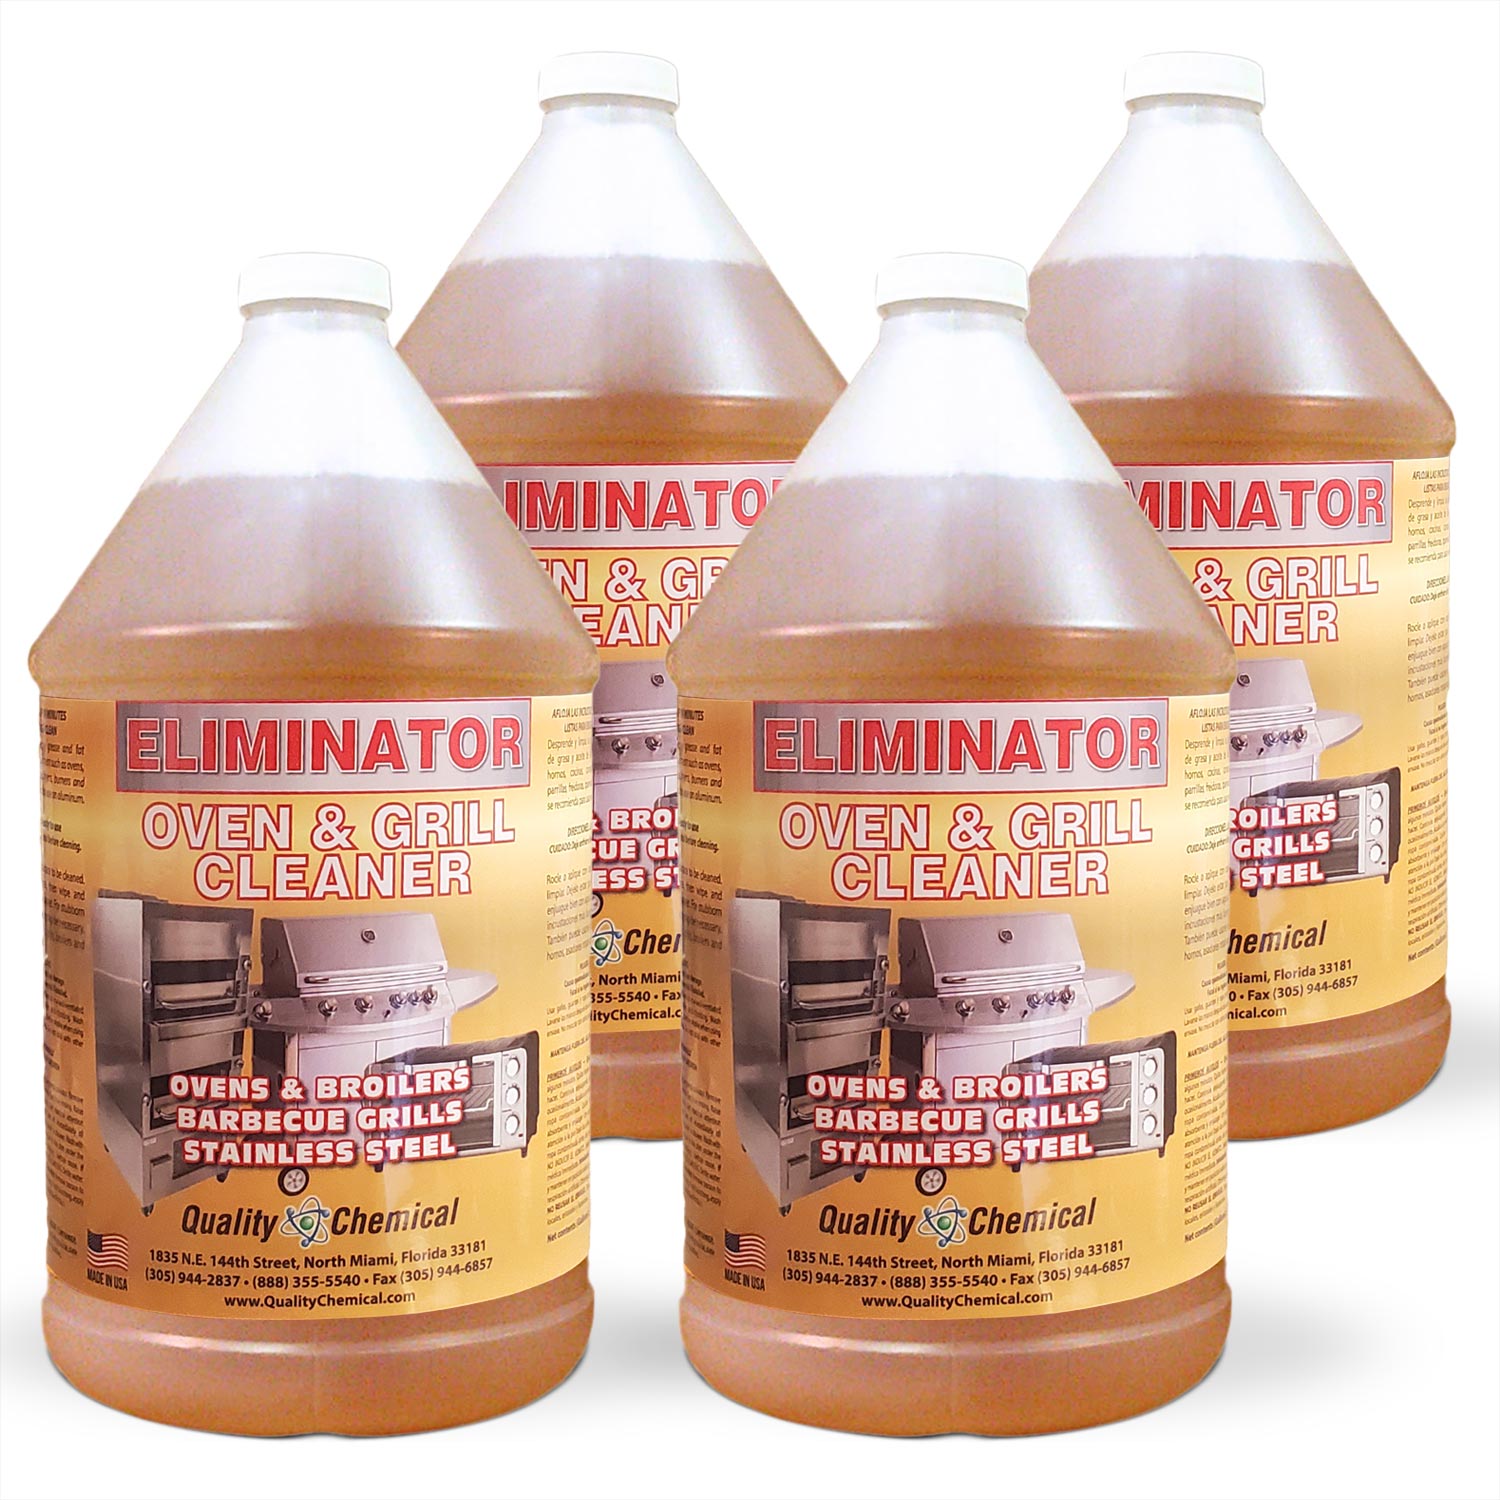 Quality Chemical Company - Eliminator Oven and Grill Cleaner